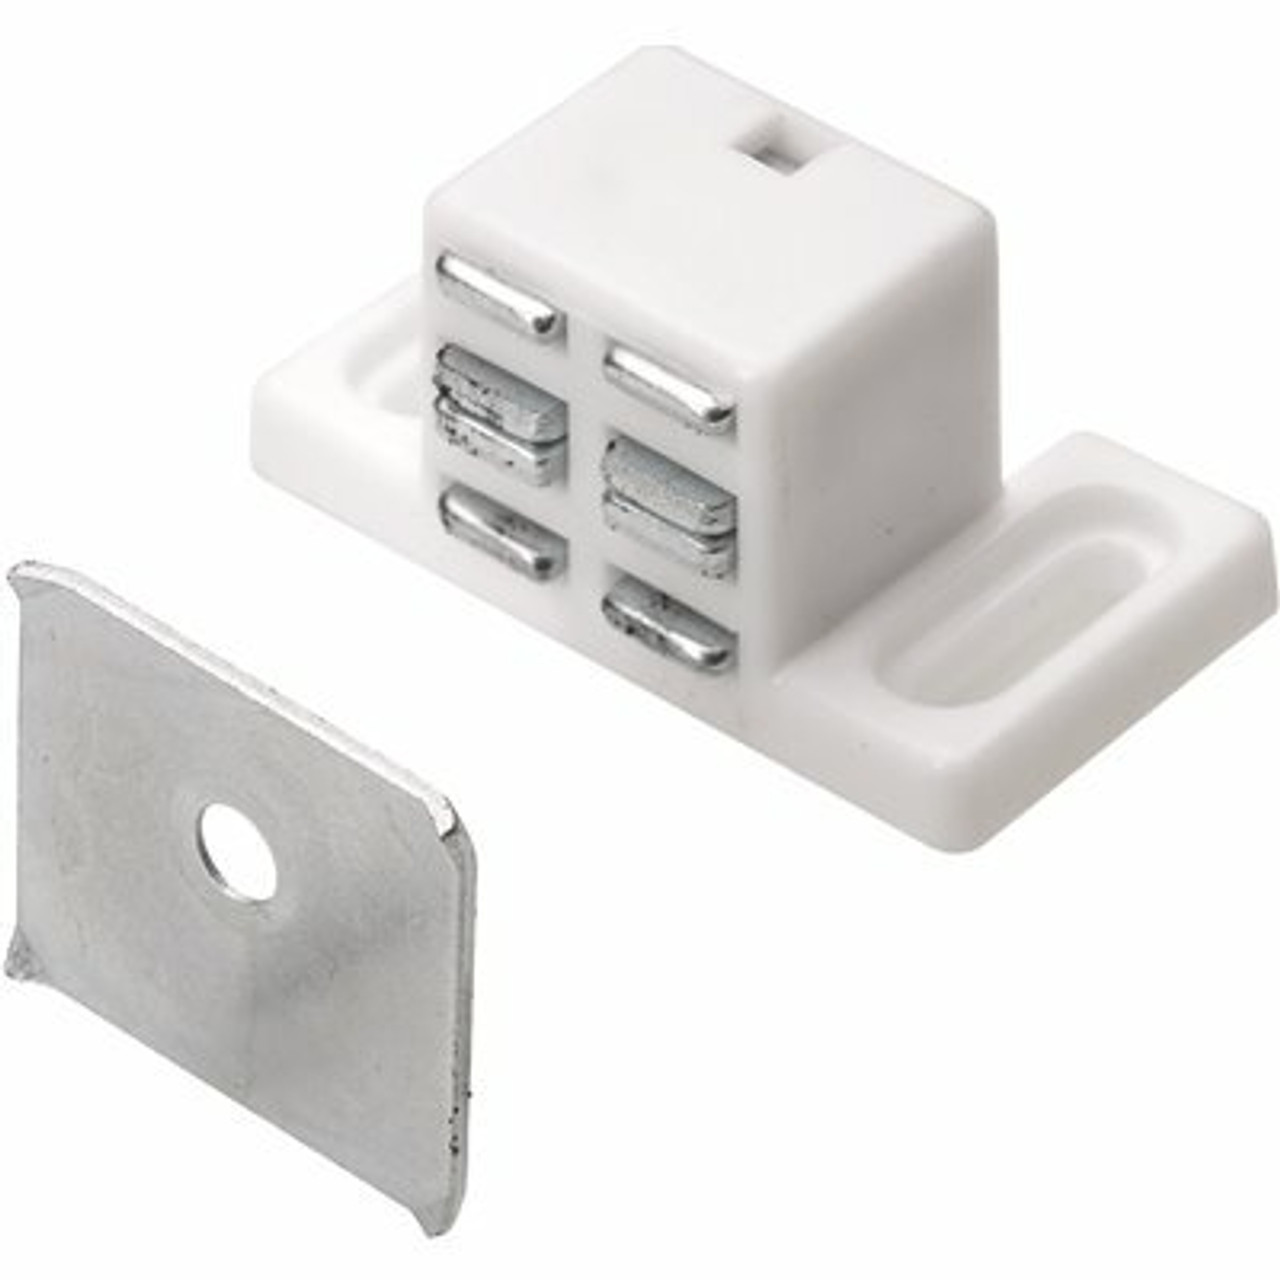 Everbilt High Rise Magnetic Catch, White (300-Pack)